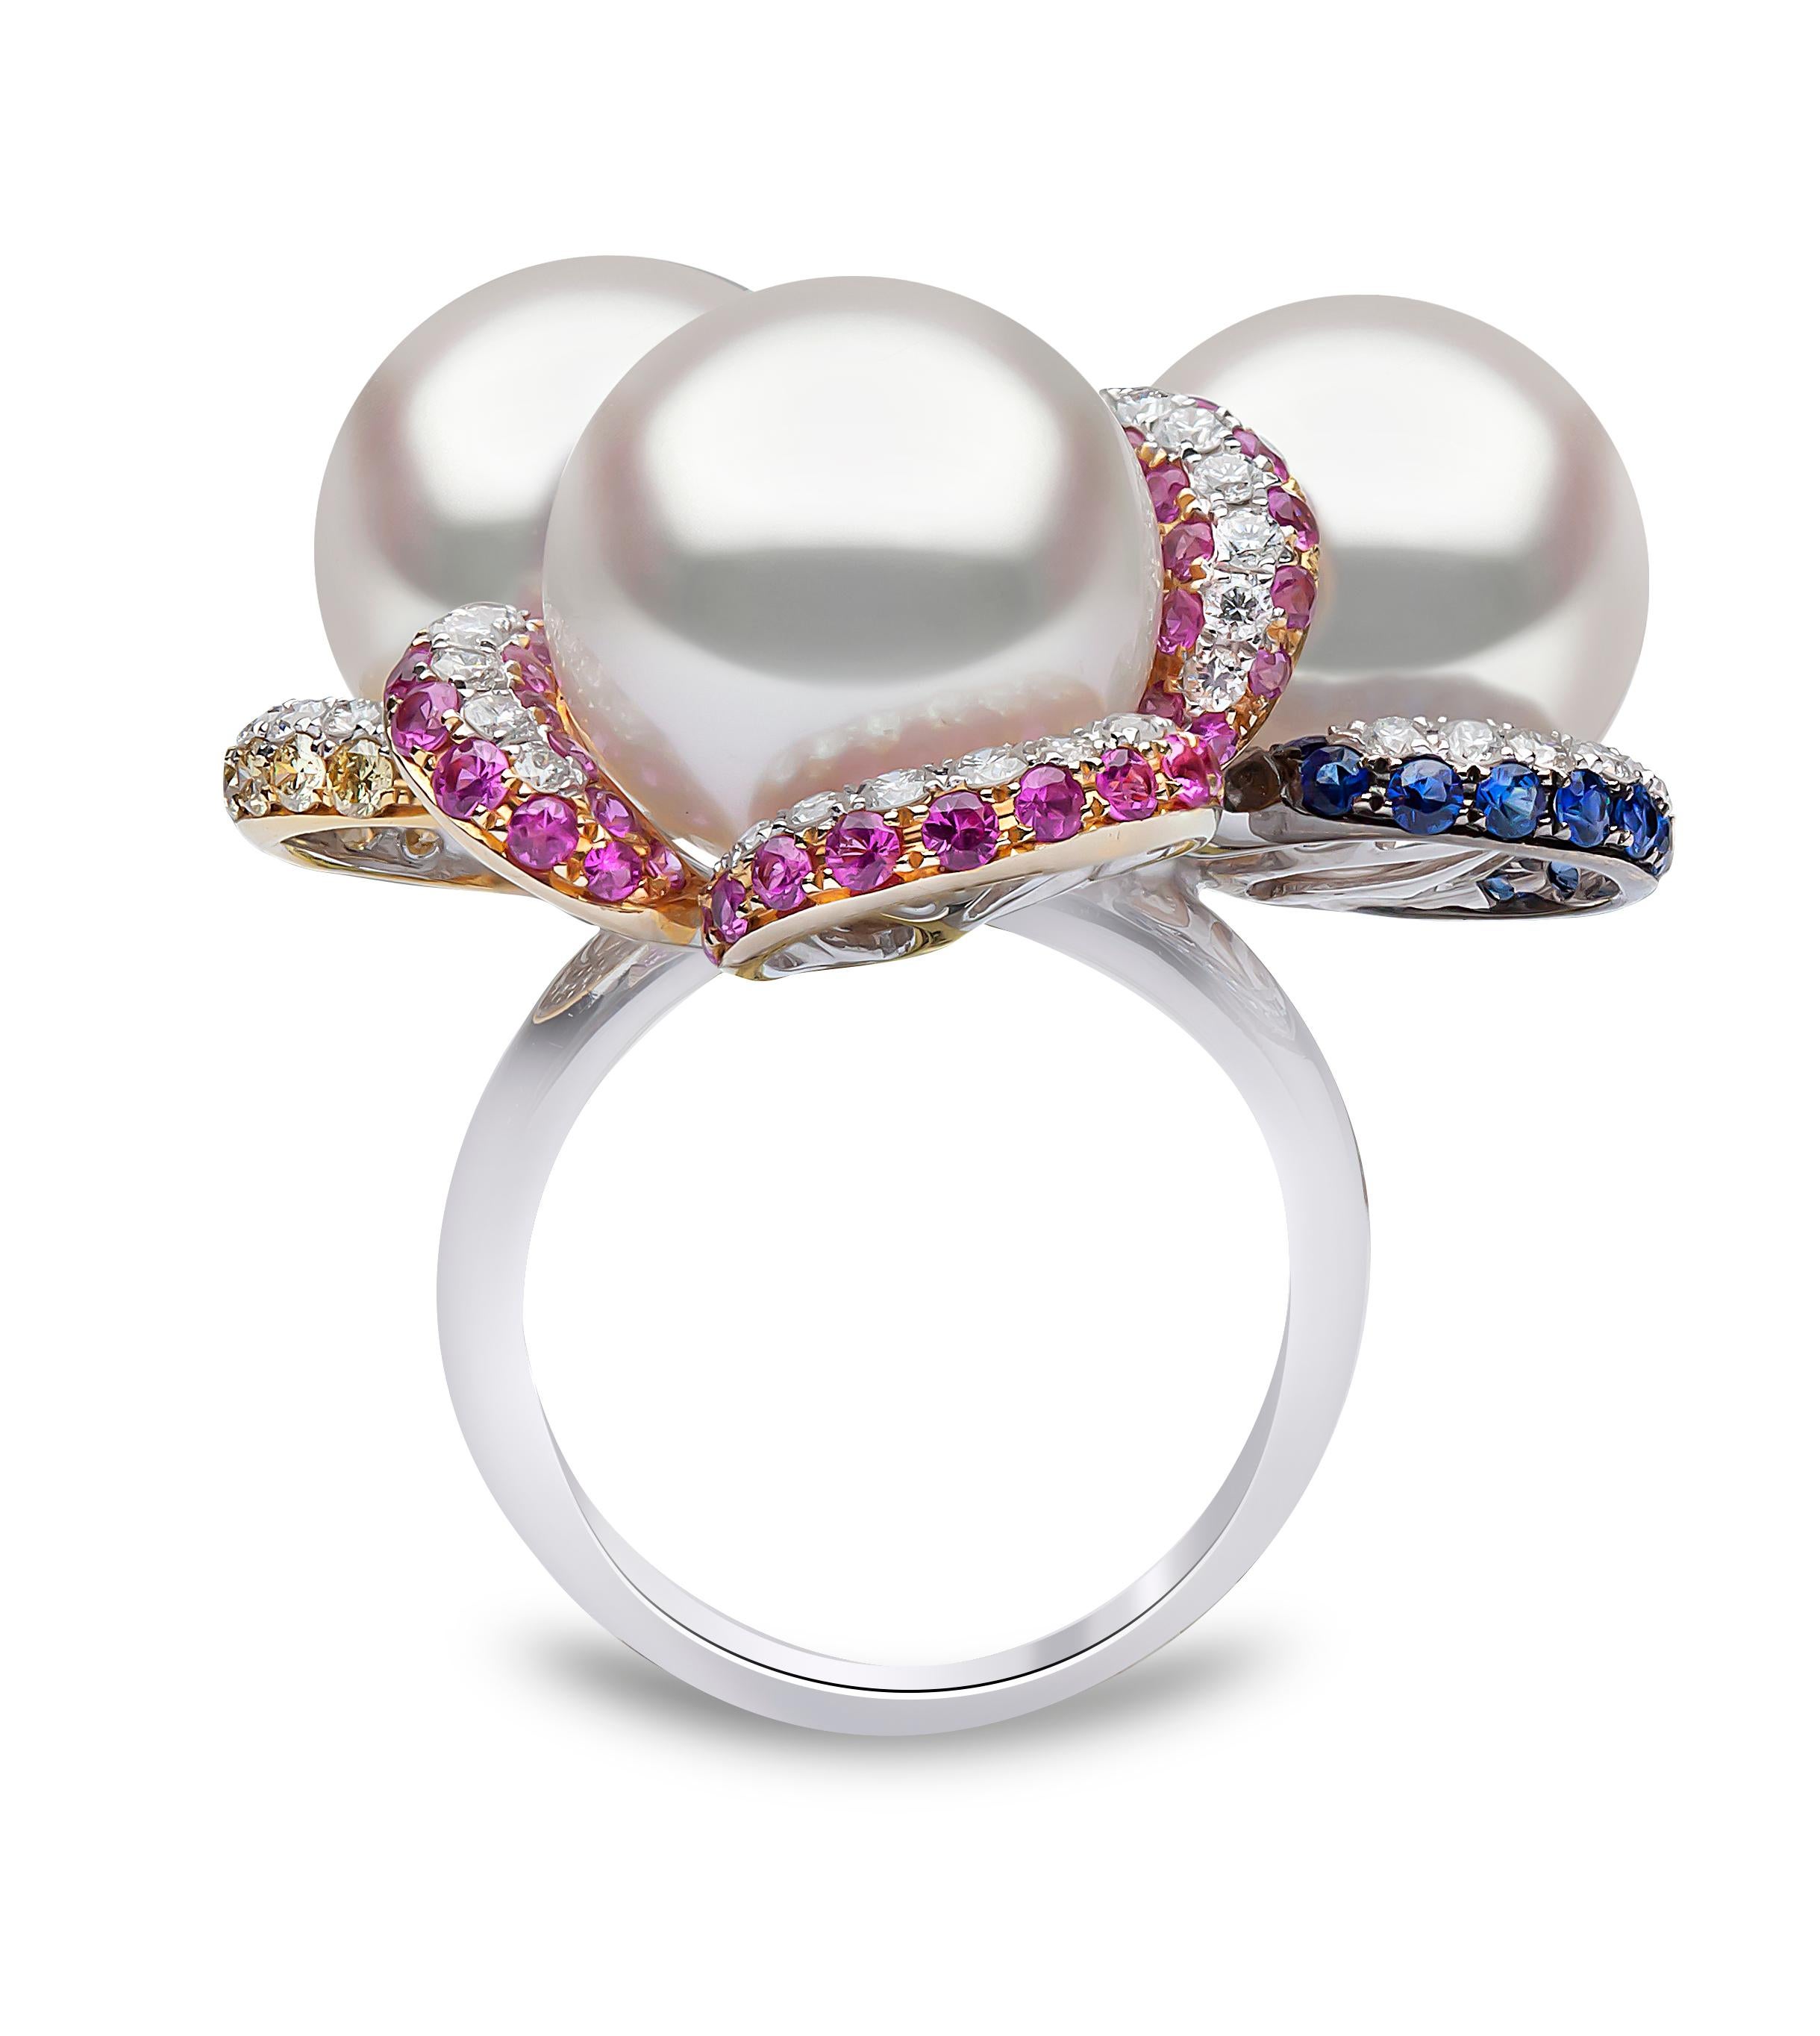 This unique ring by Yoko London features three lustrous South Sea pearls embedded amongst vibrant sapphires and diamonds. This extraordinary ring pays true testament to the meticulous craftsmanship of our expert team. Pair this dramatic ring with